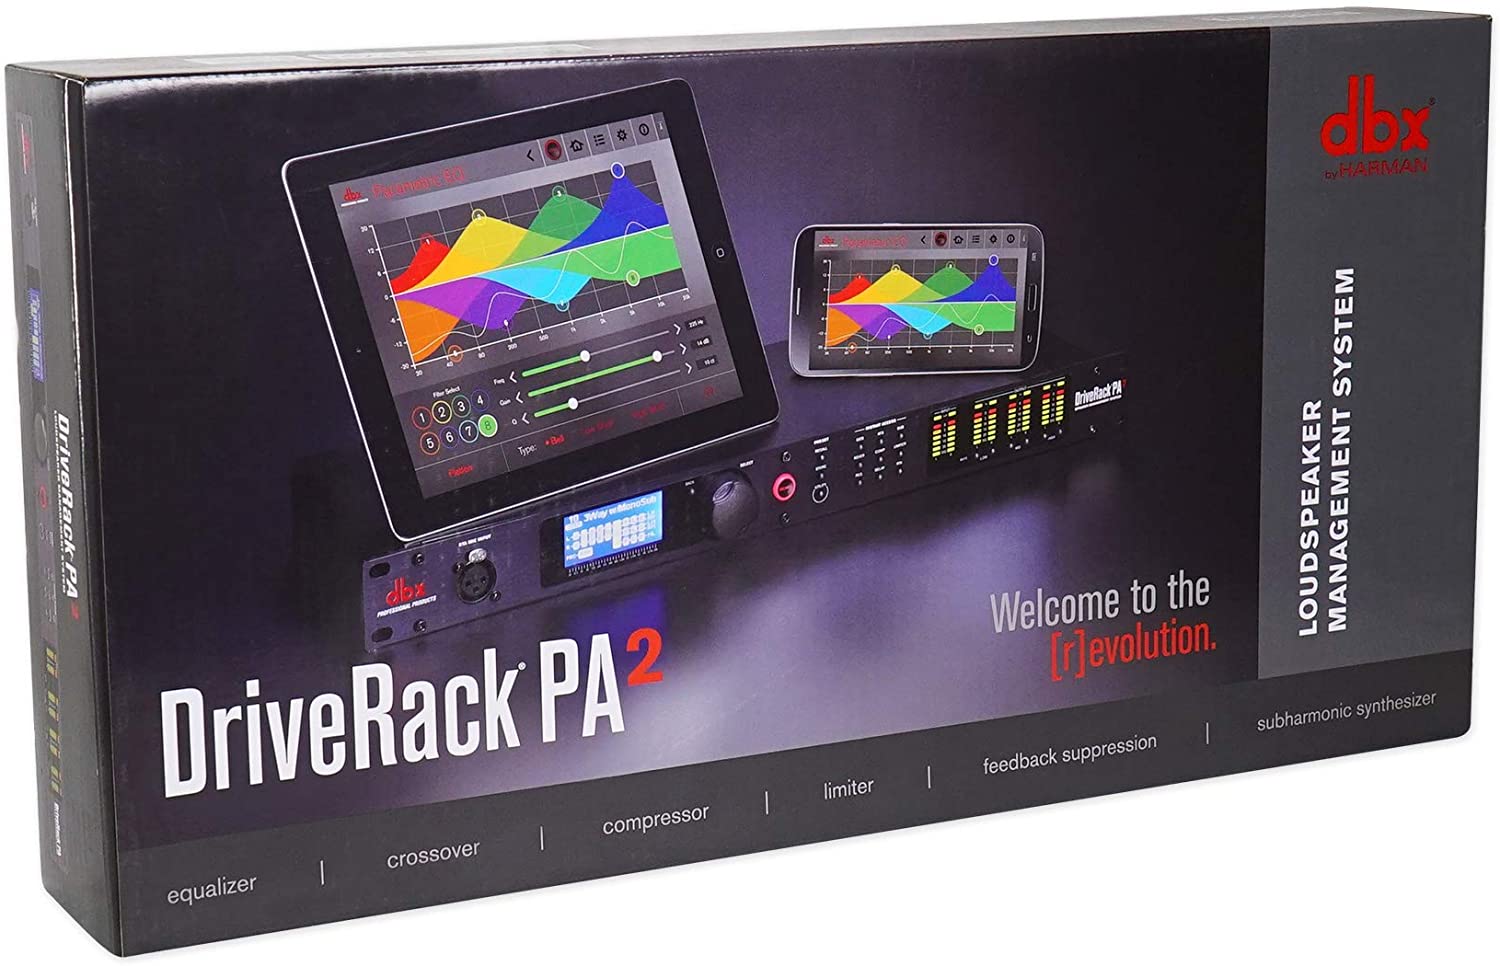 download dbx driverack 260 software for mac